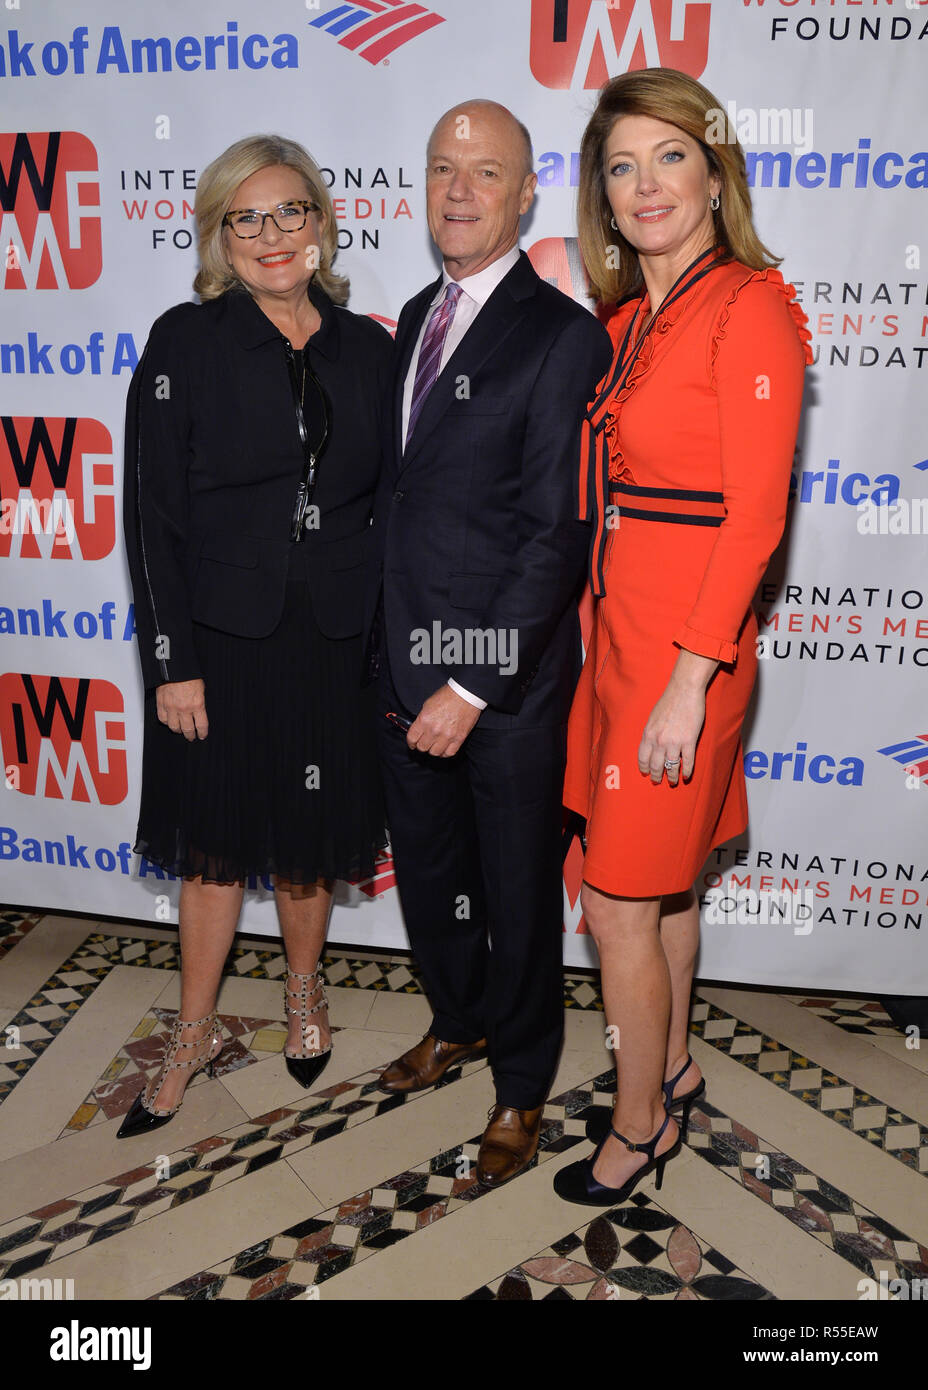 Cynthia McFadden, Phil Griffin and Norah O'Donnell attend the 2018 International Women's Media Foundation's Courage In Journalism Awards at Cipriani 4 Stock Photo